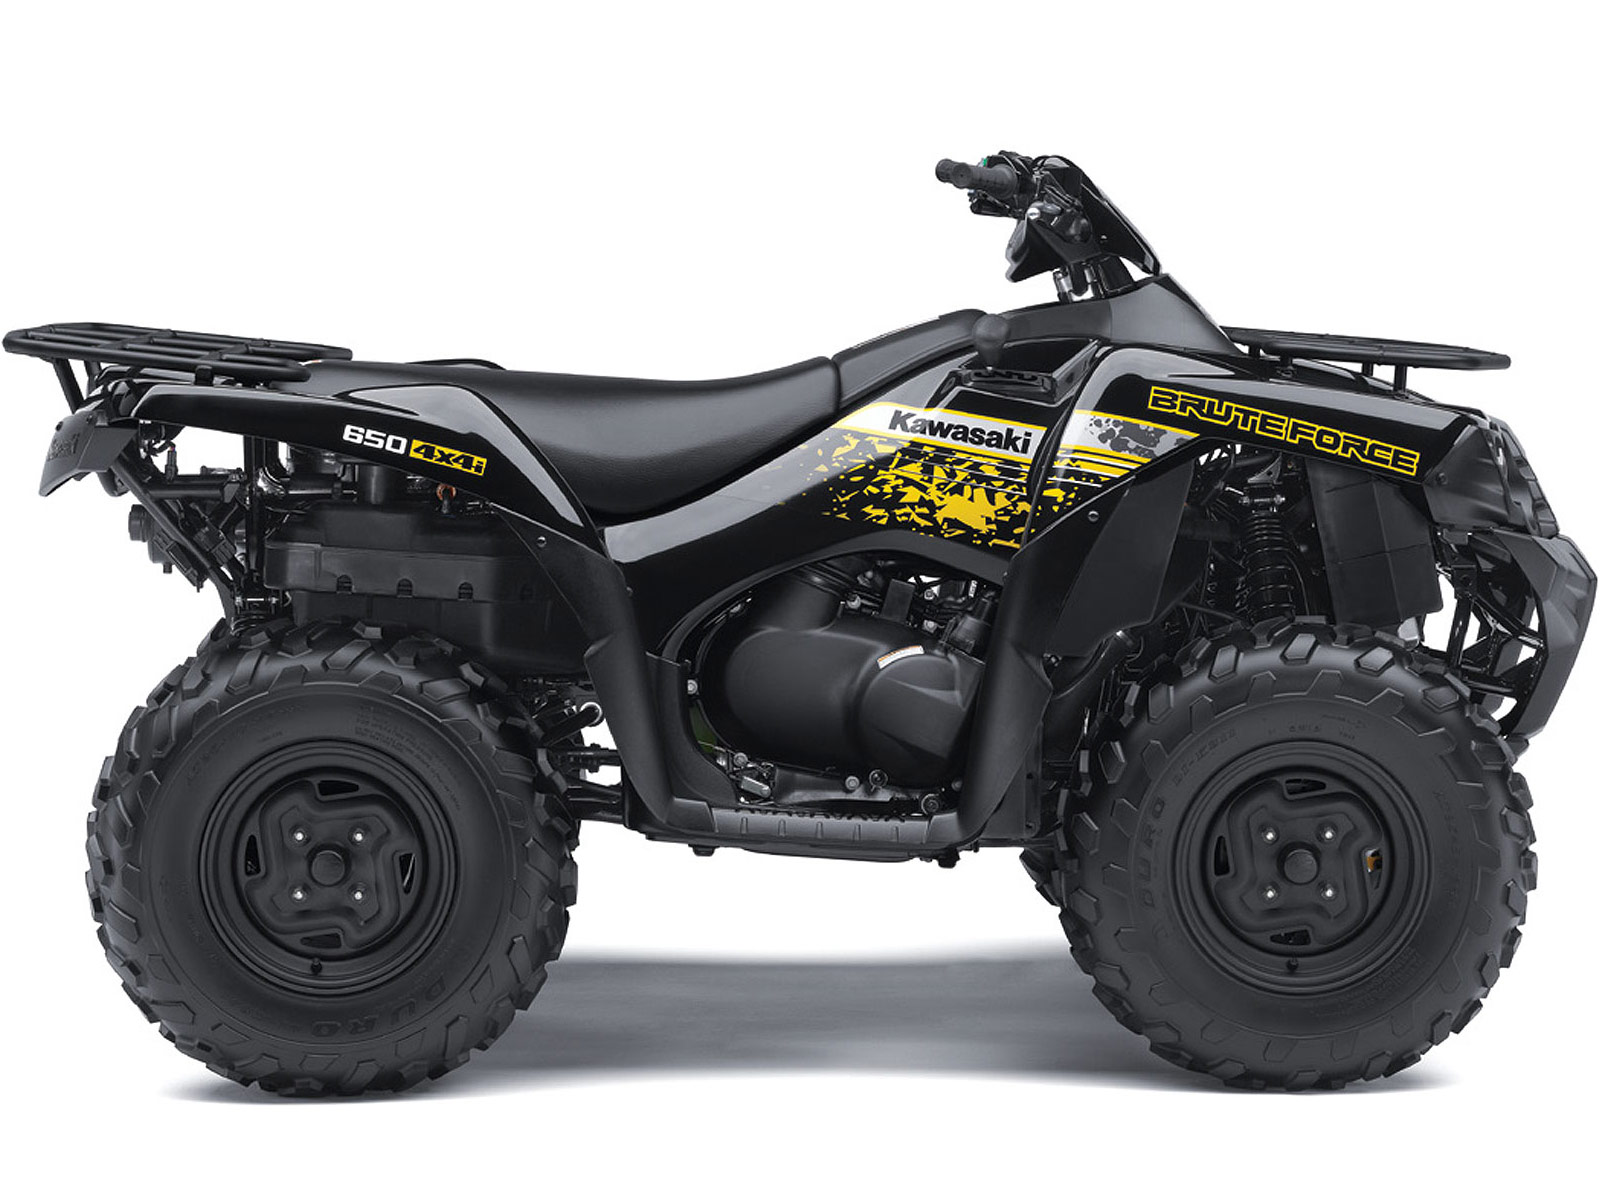 ATV pictures, wallpapers, specs, insurance, accident lawyers: 2013 Kawasaki Brute 650 4x4i | Auto Insurance Information